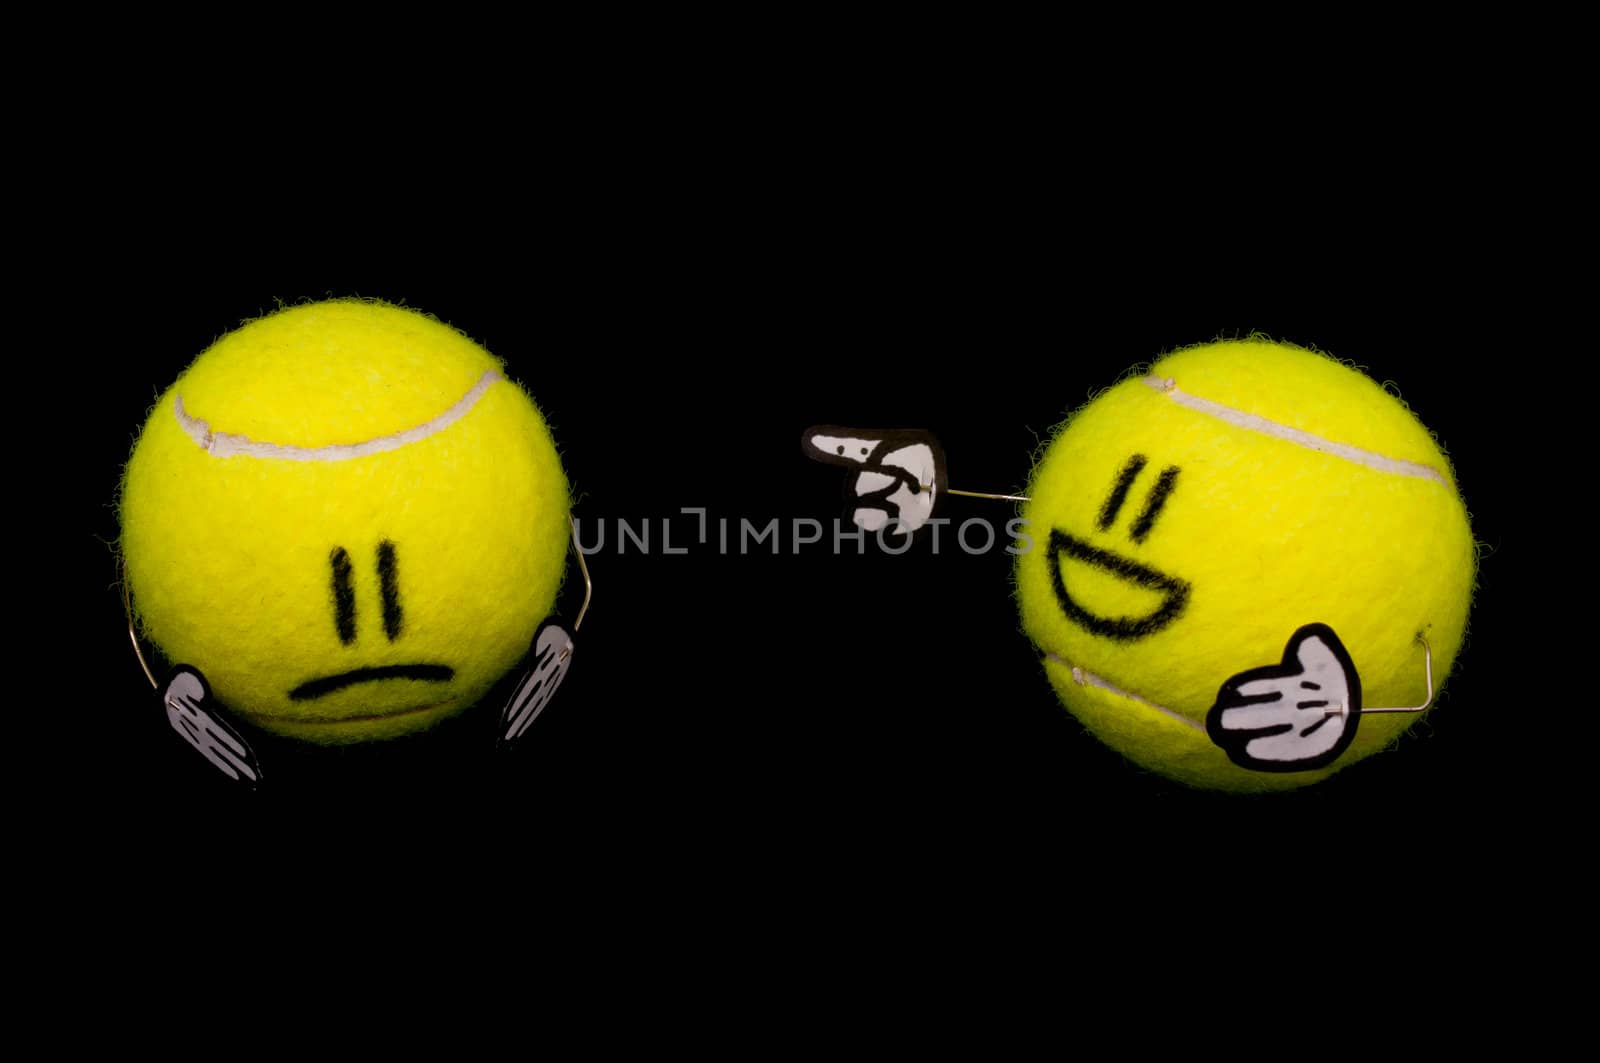 Tennis ball hurting another yellow tennis ball, one laugh, another is sad